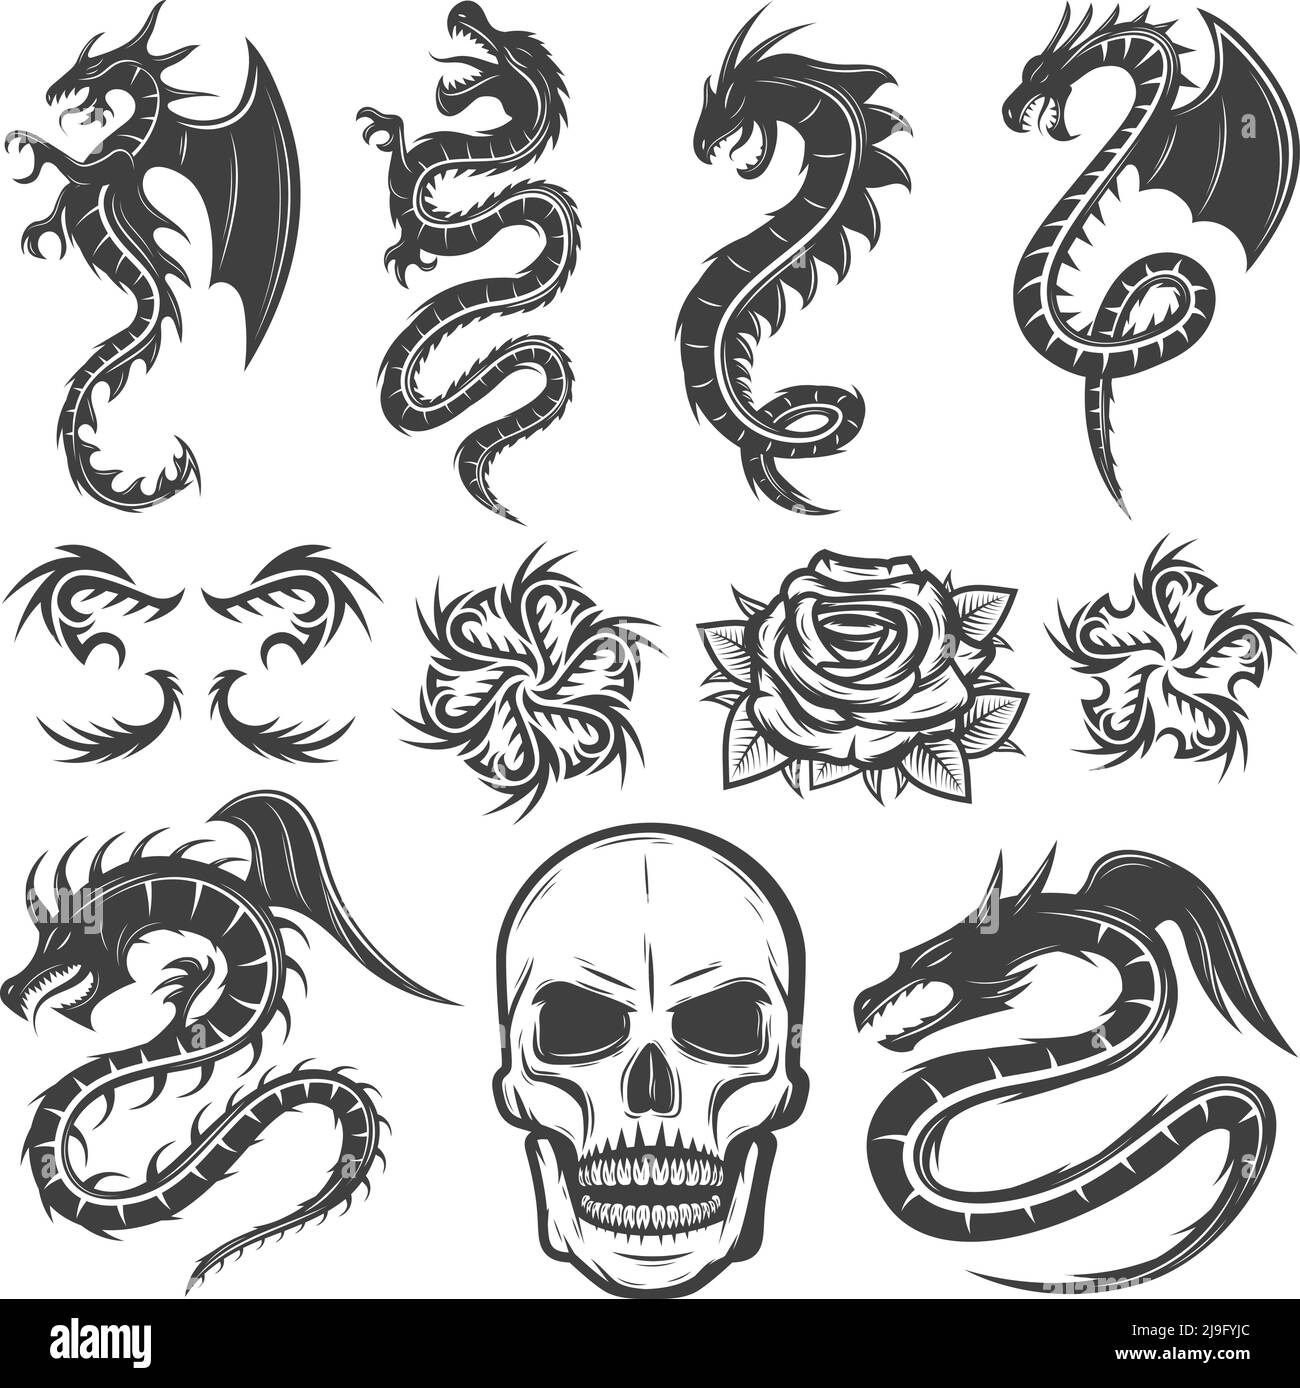 Vintage monochrome tattoos collection with fantasy dragons flowers and skull isolated vector illustration Stock Vector